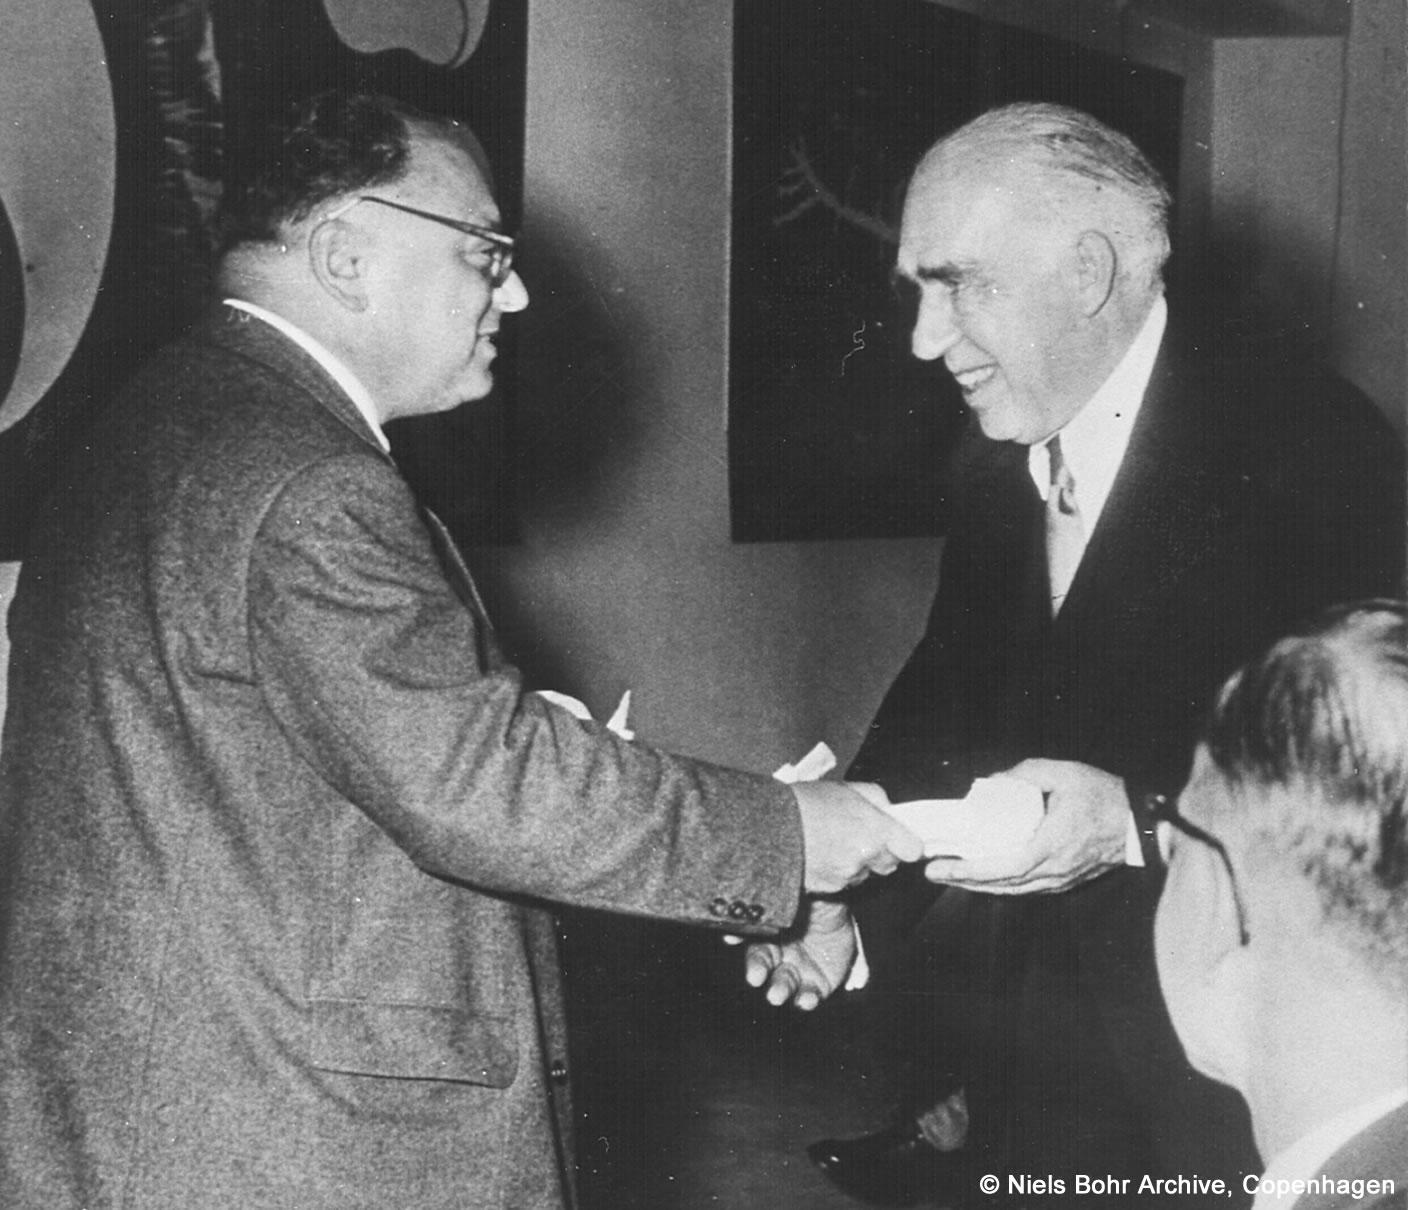 Niels Bohr shakes hands with Wolfgang Pauli